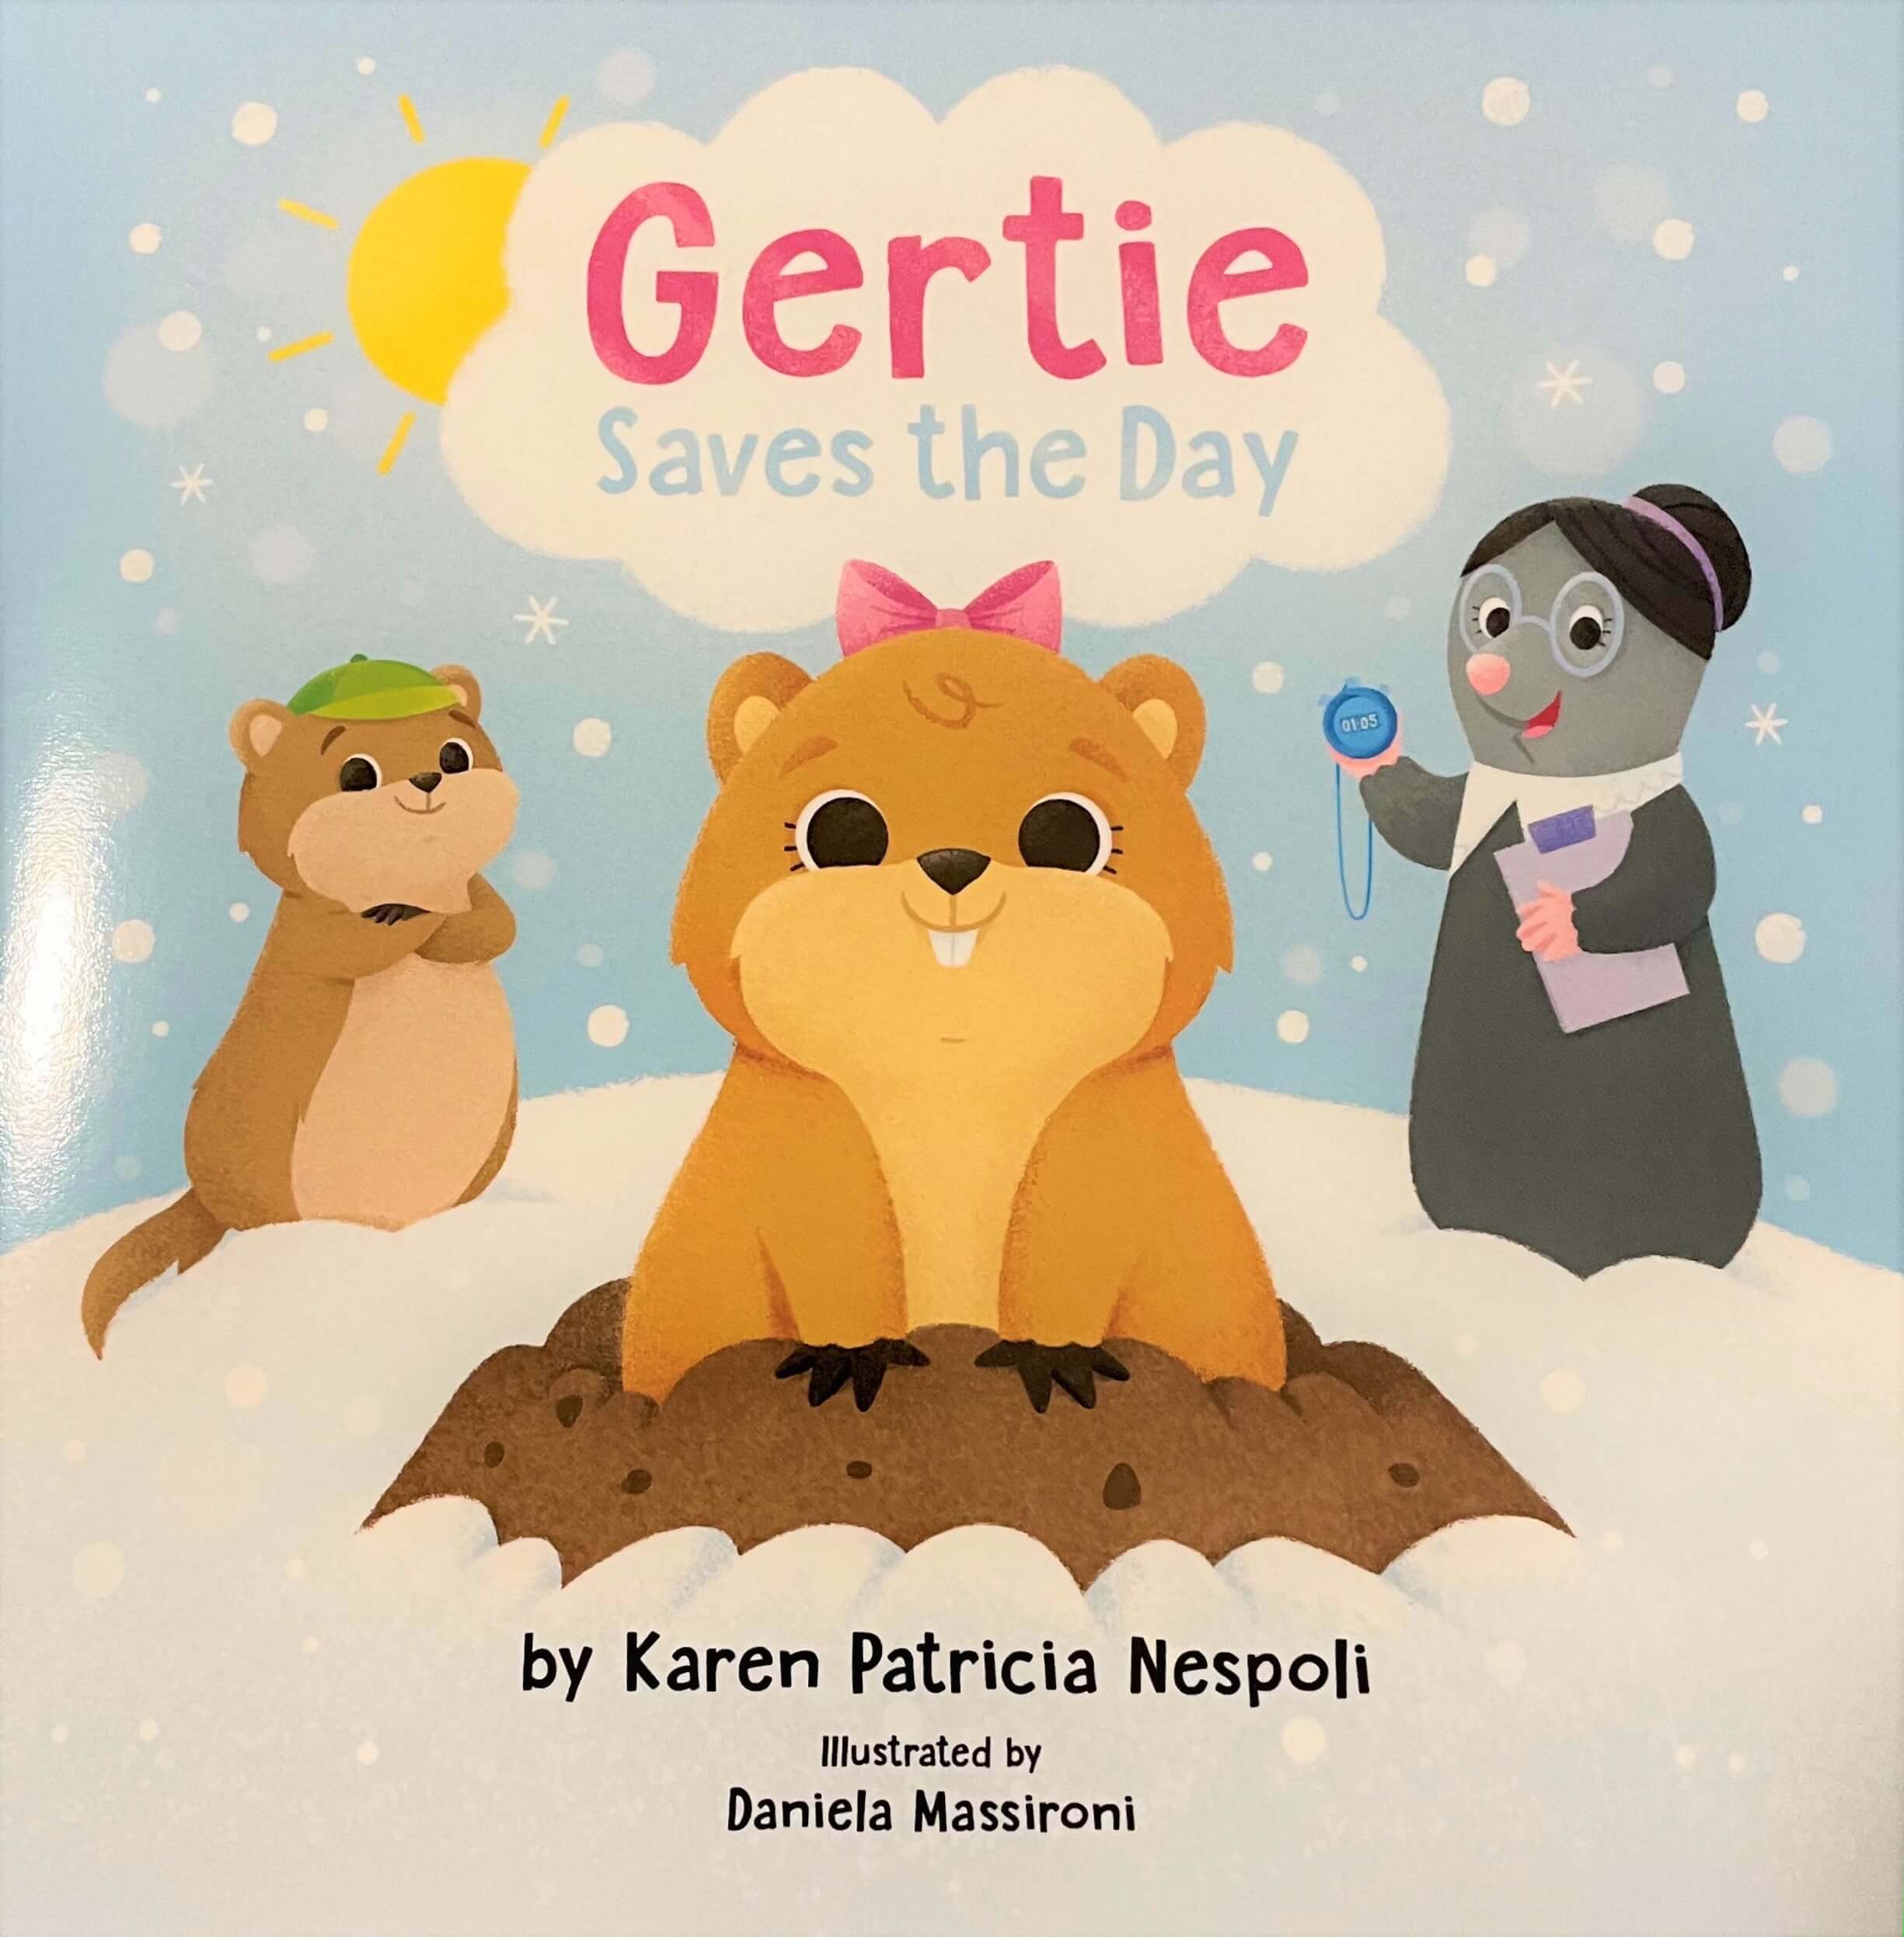 Gertie Saves the Day book cover